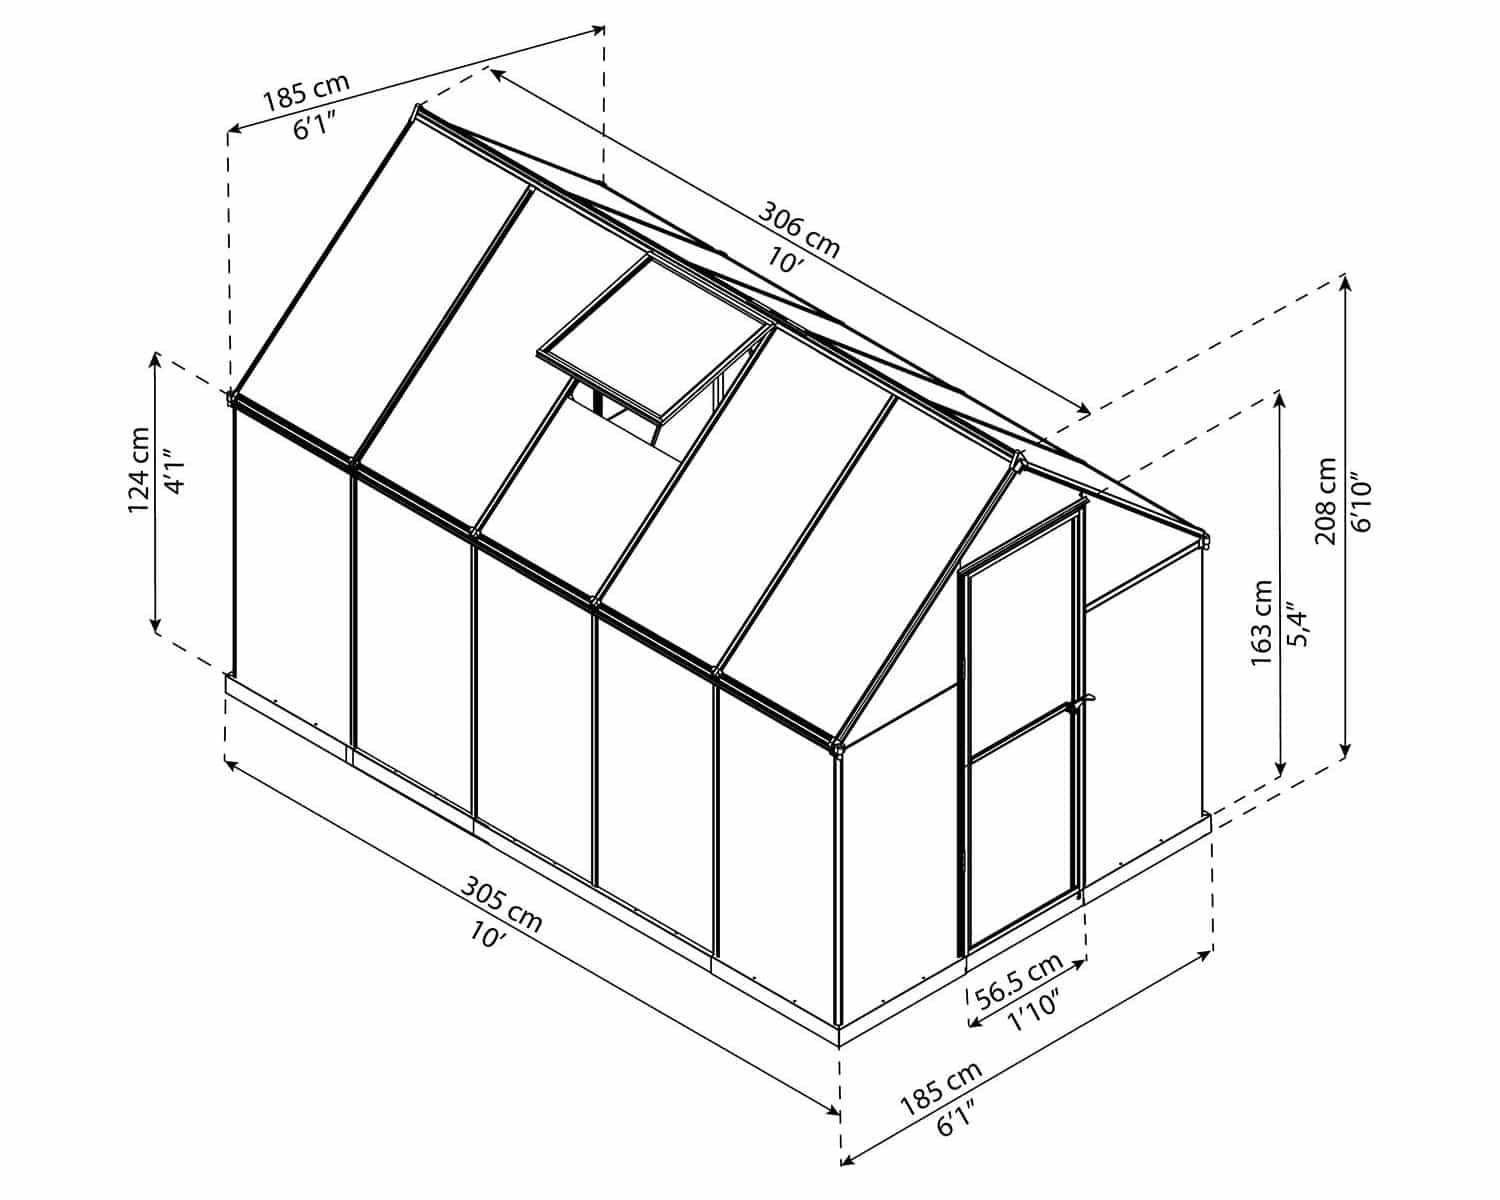 Mythos™ 6x6x10.ft Twin Wall Greenhouse - Dive To Garden